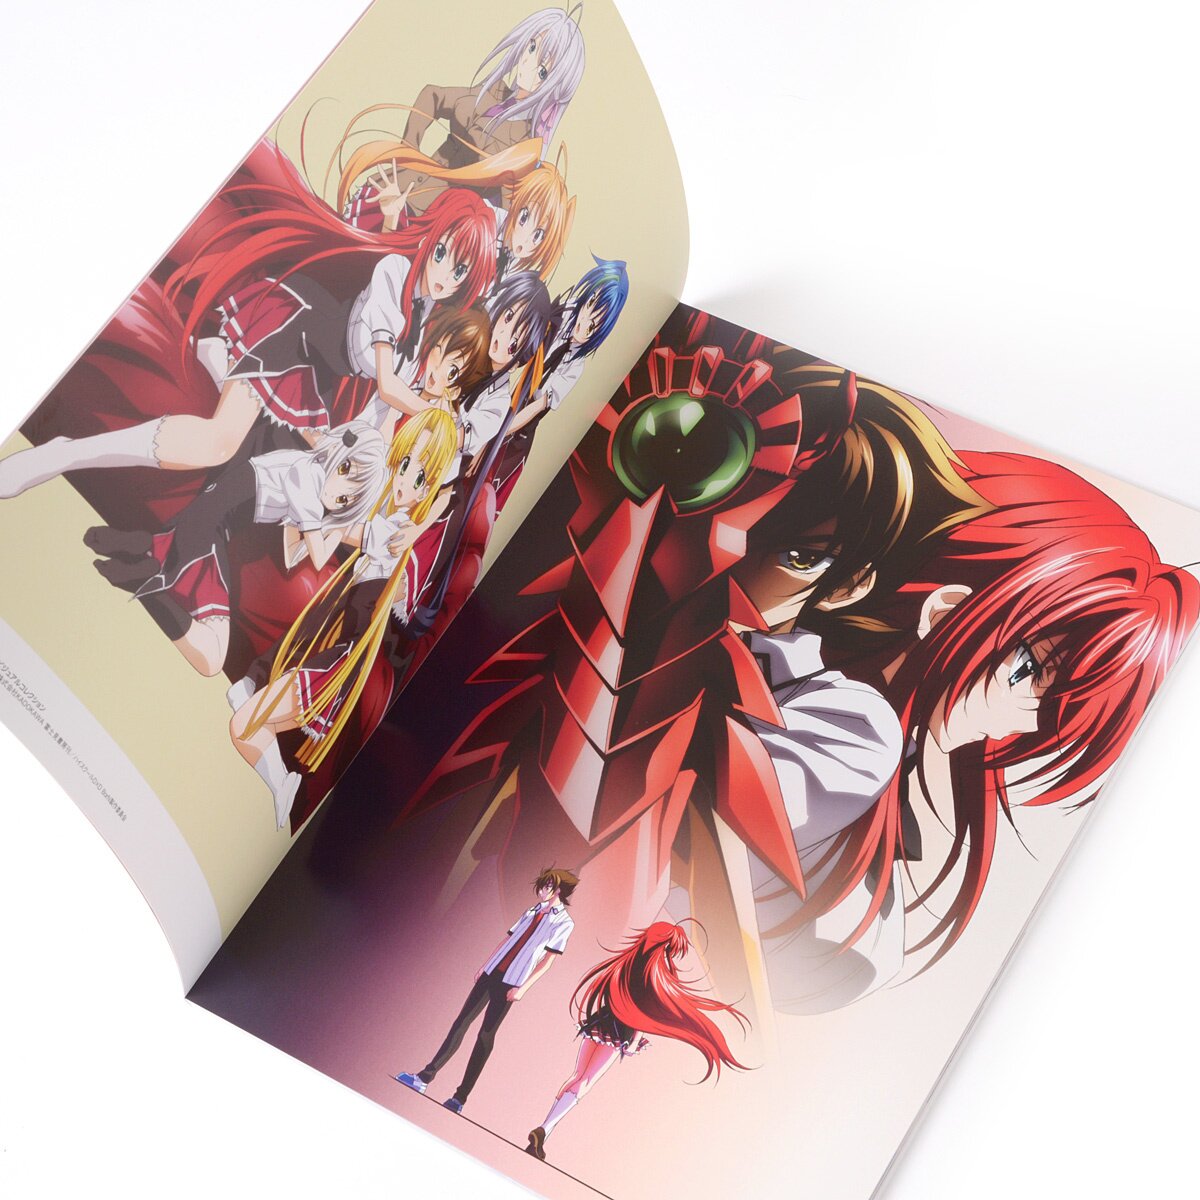 What is your review of Highschool DxD? - Quora